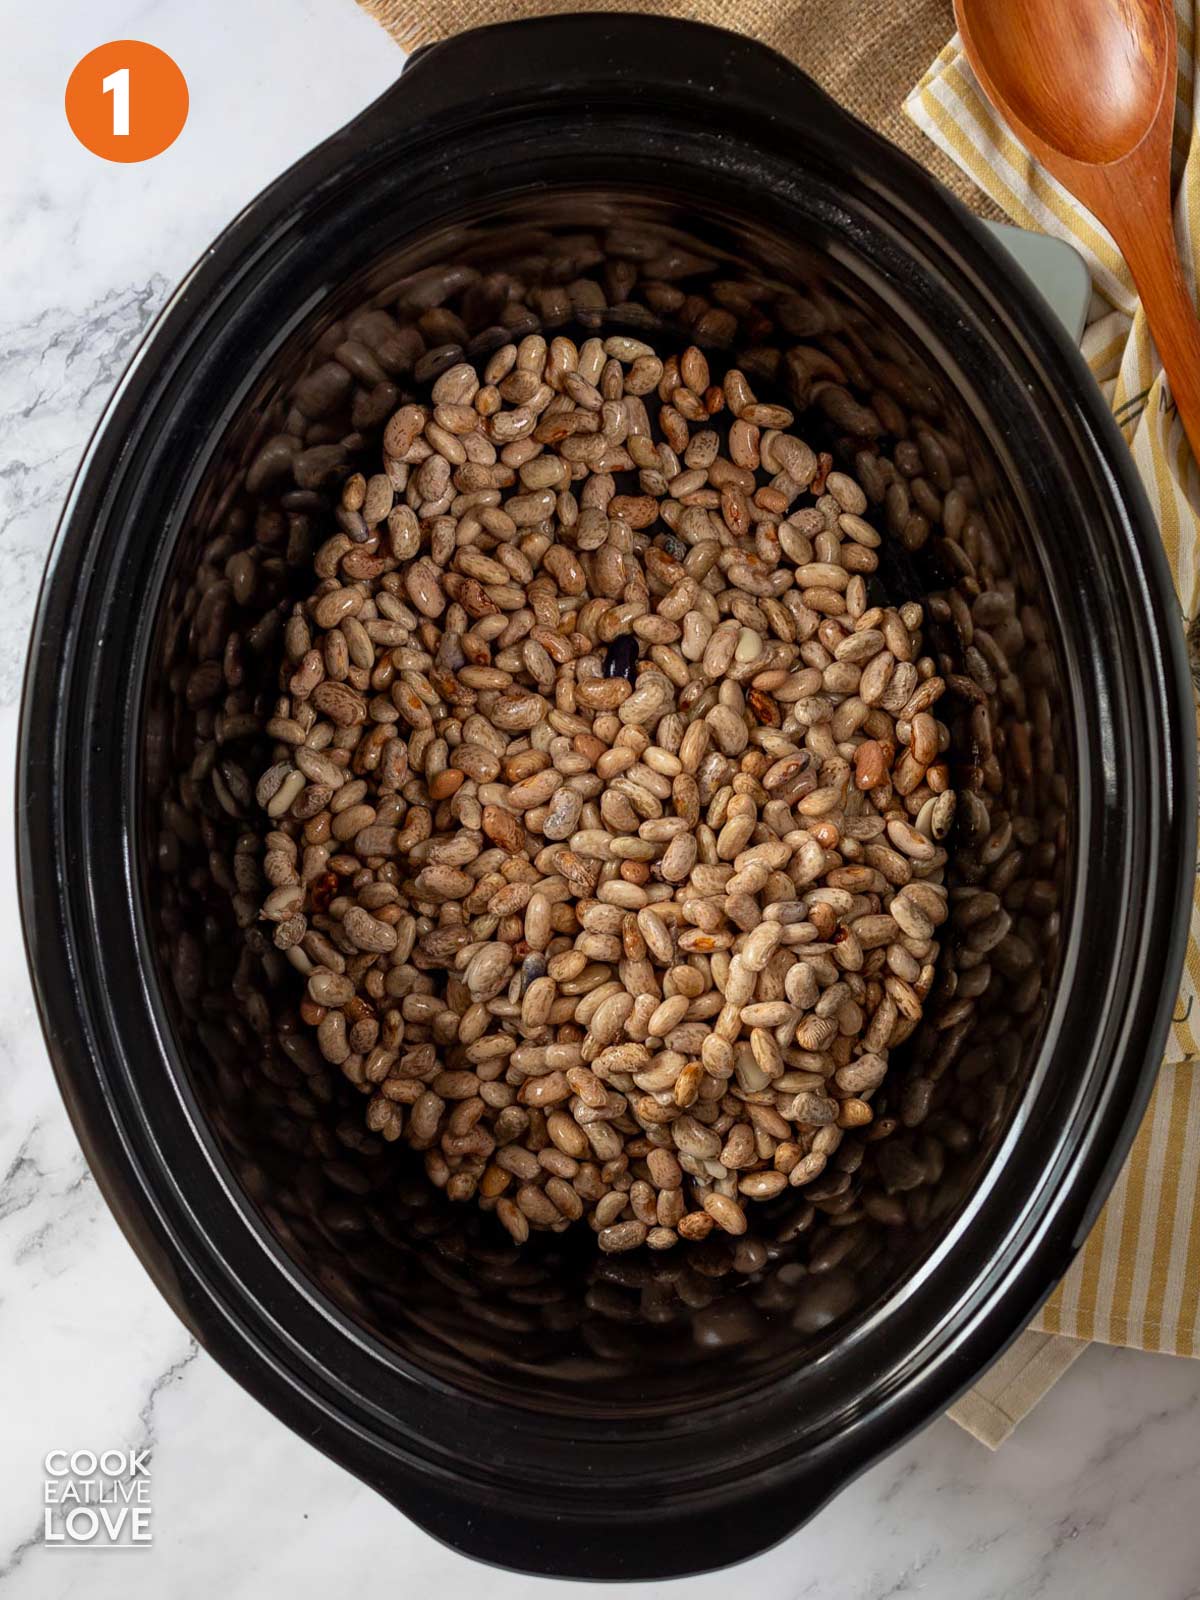 Pinto beans in the slow cooker.